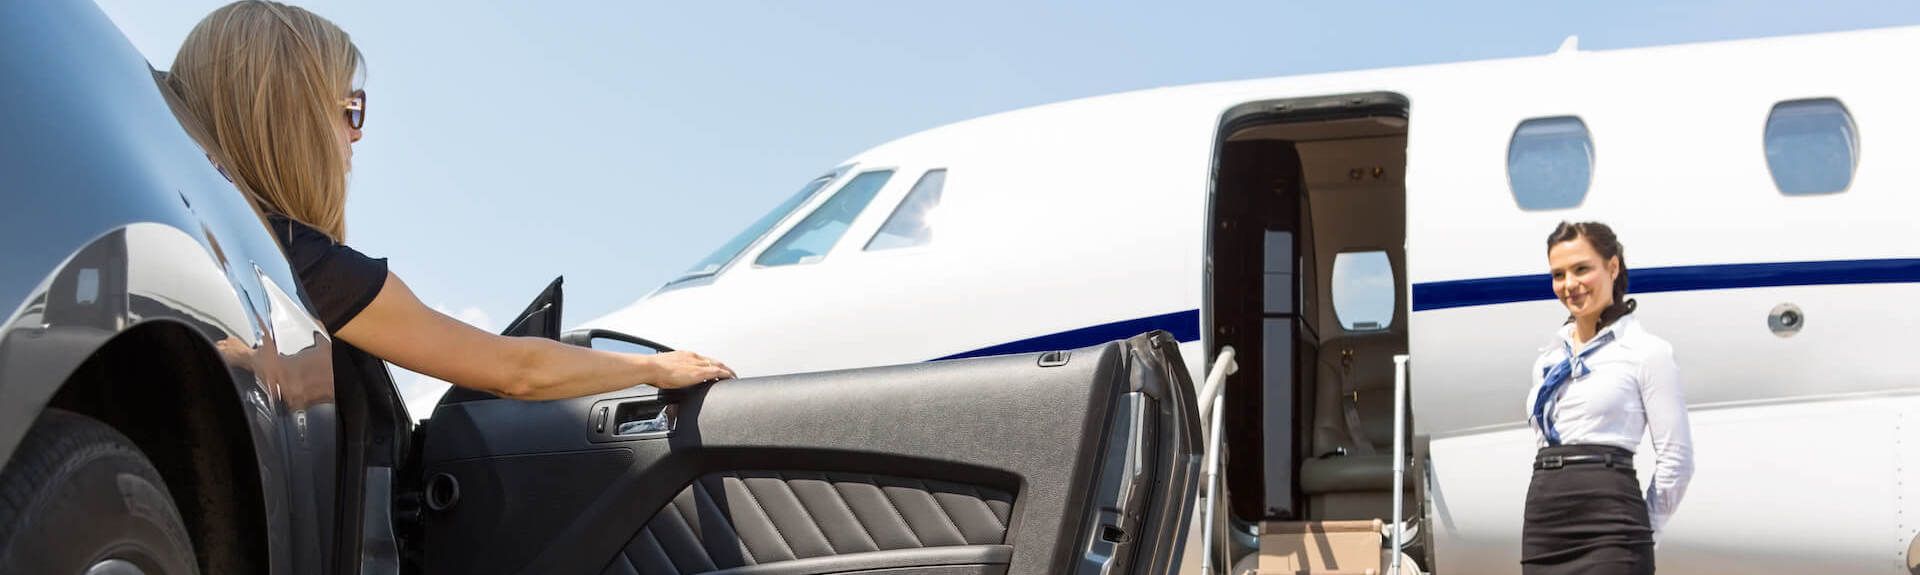 LAX limo and transportation service